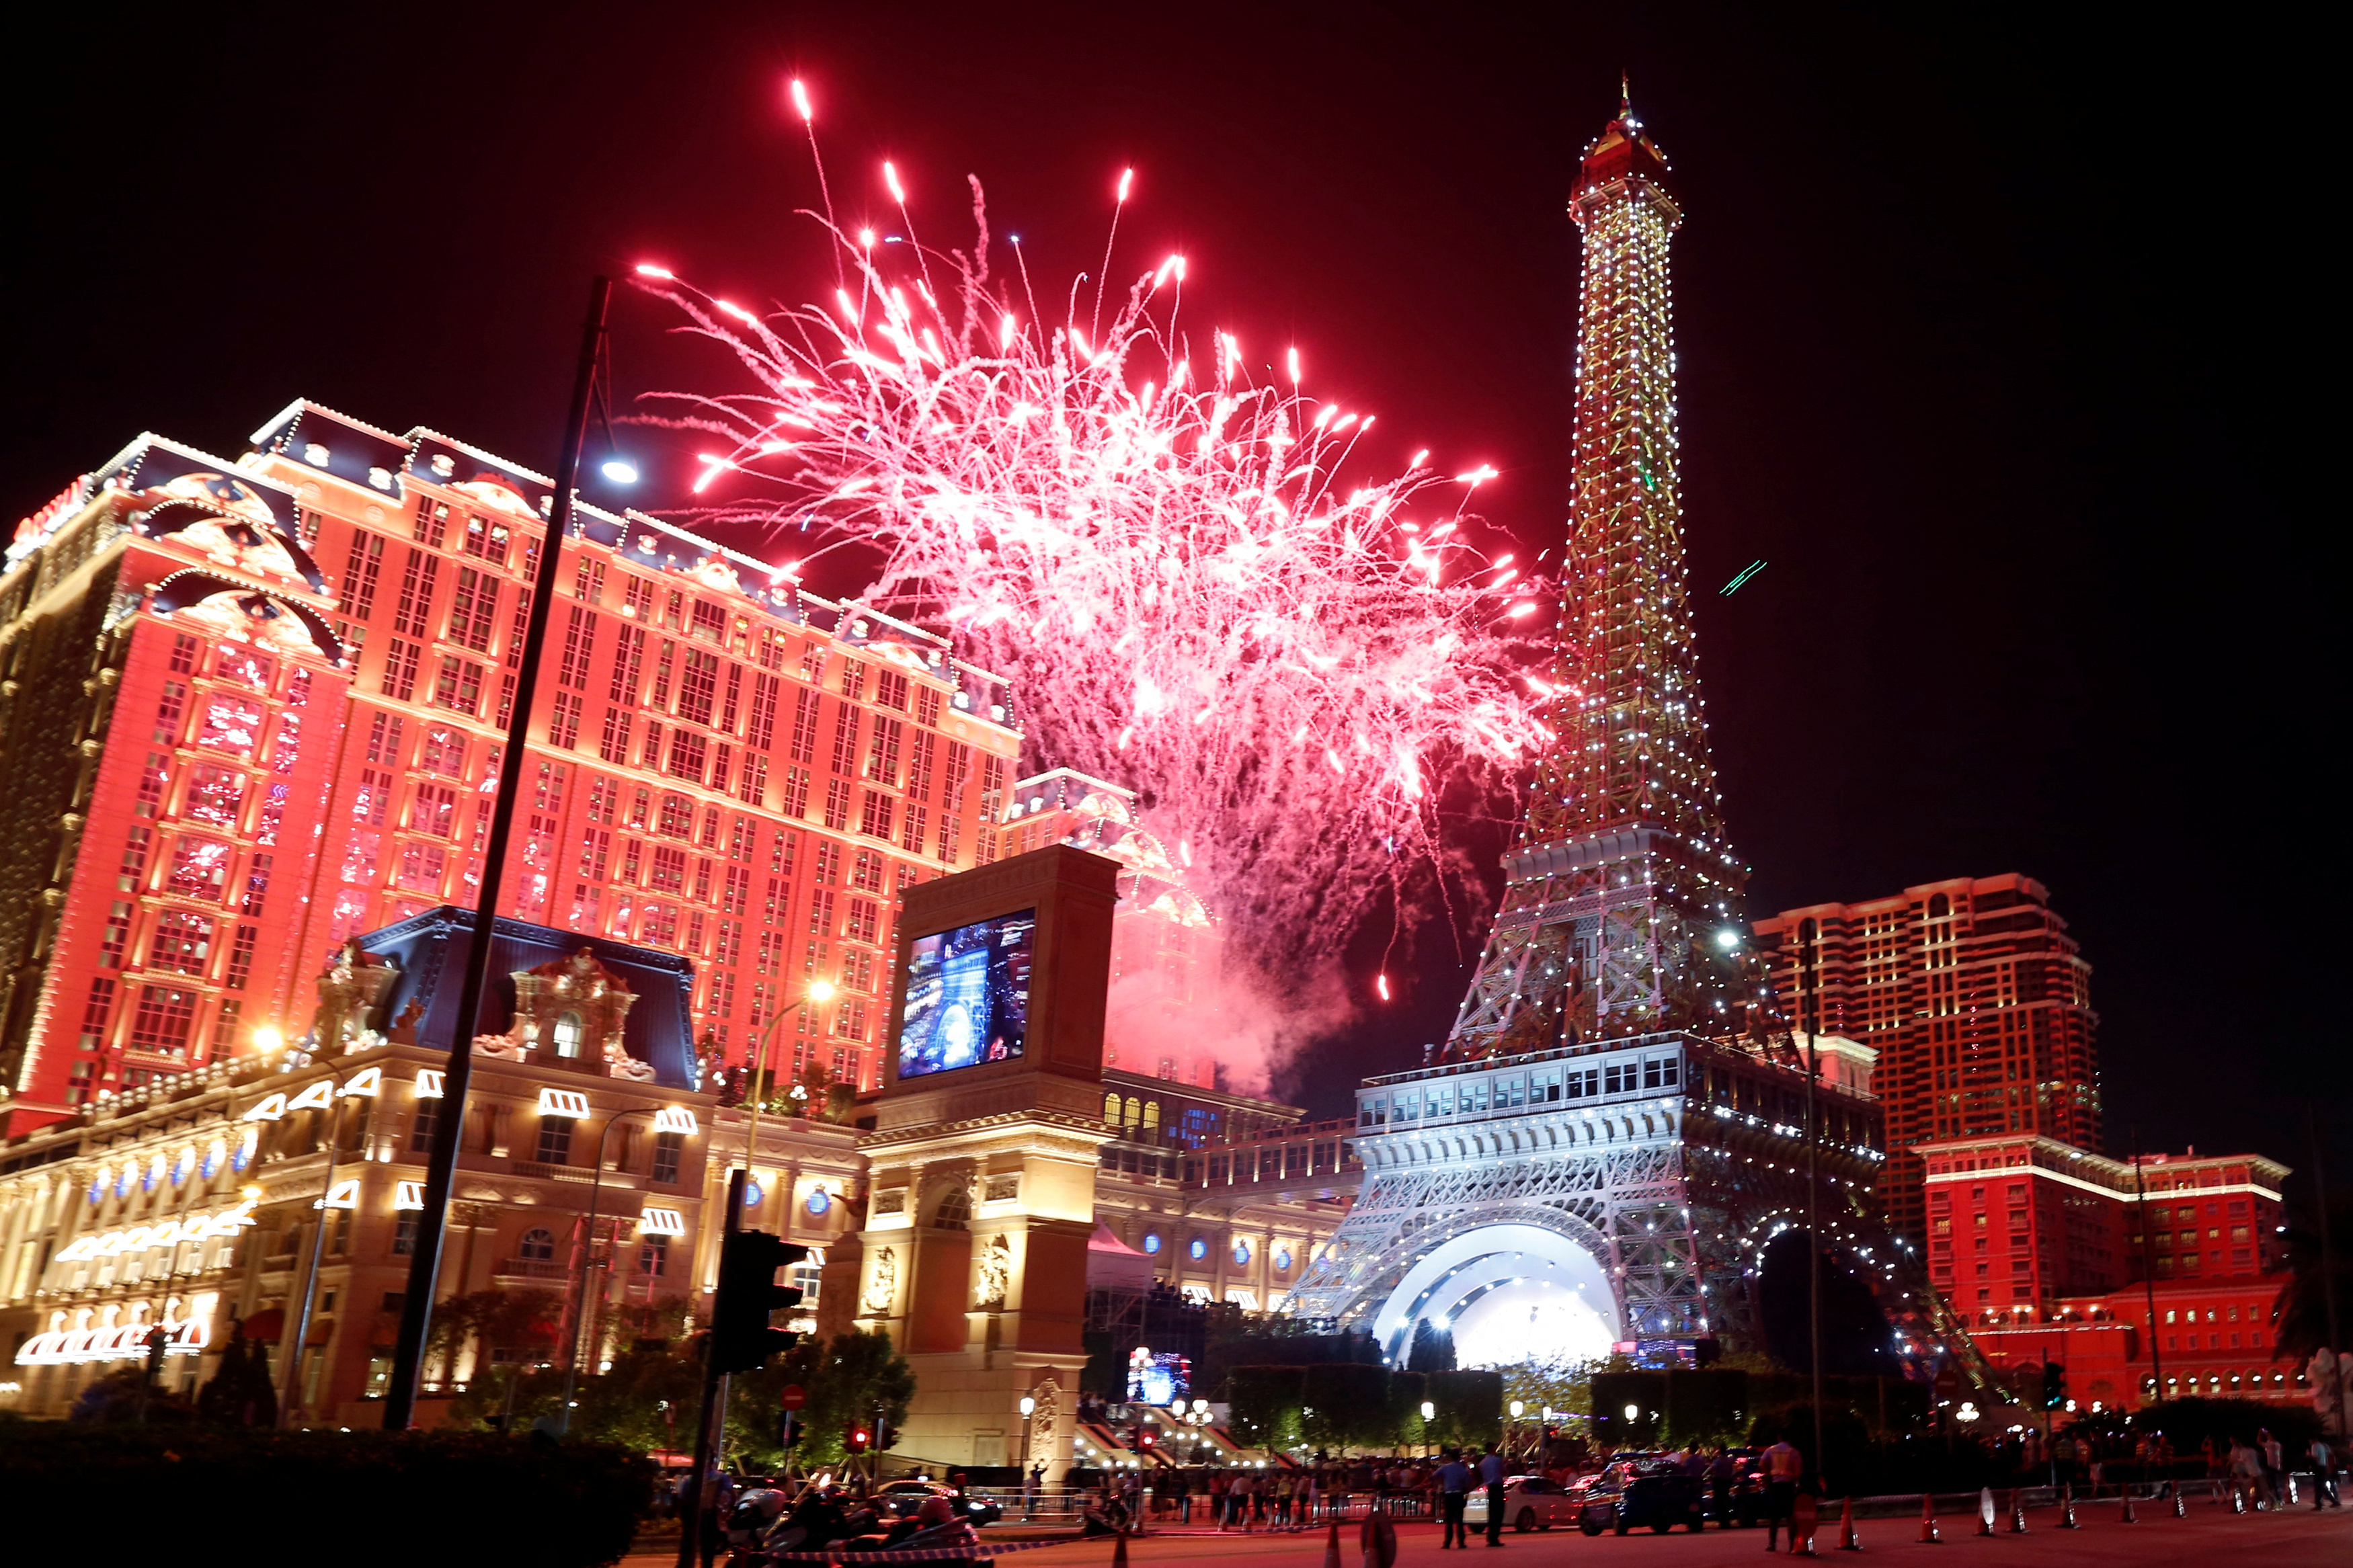 Fireworks explode over Parisian Macao as part of the Las Vegas Sands development during its opening ceremony in Macau